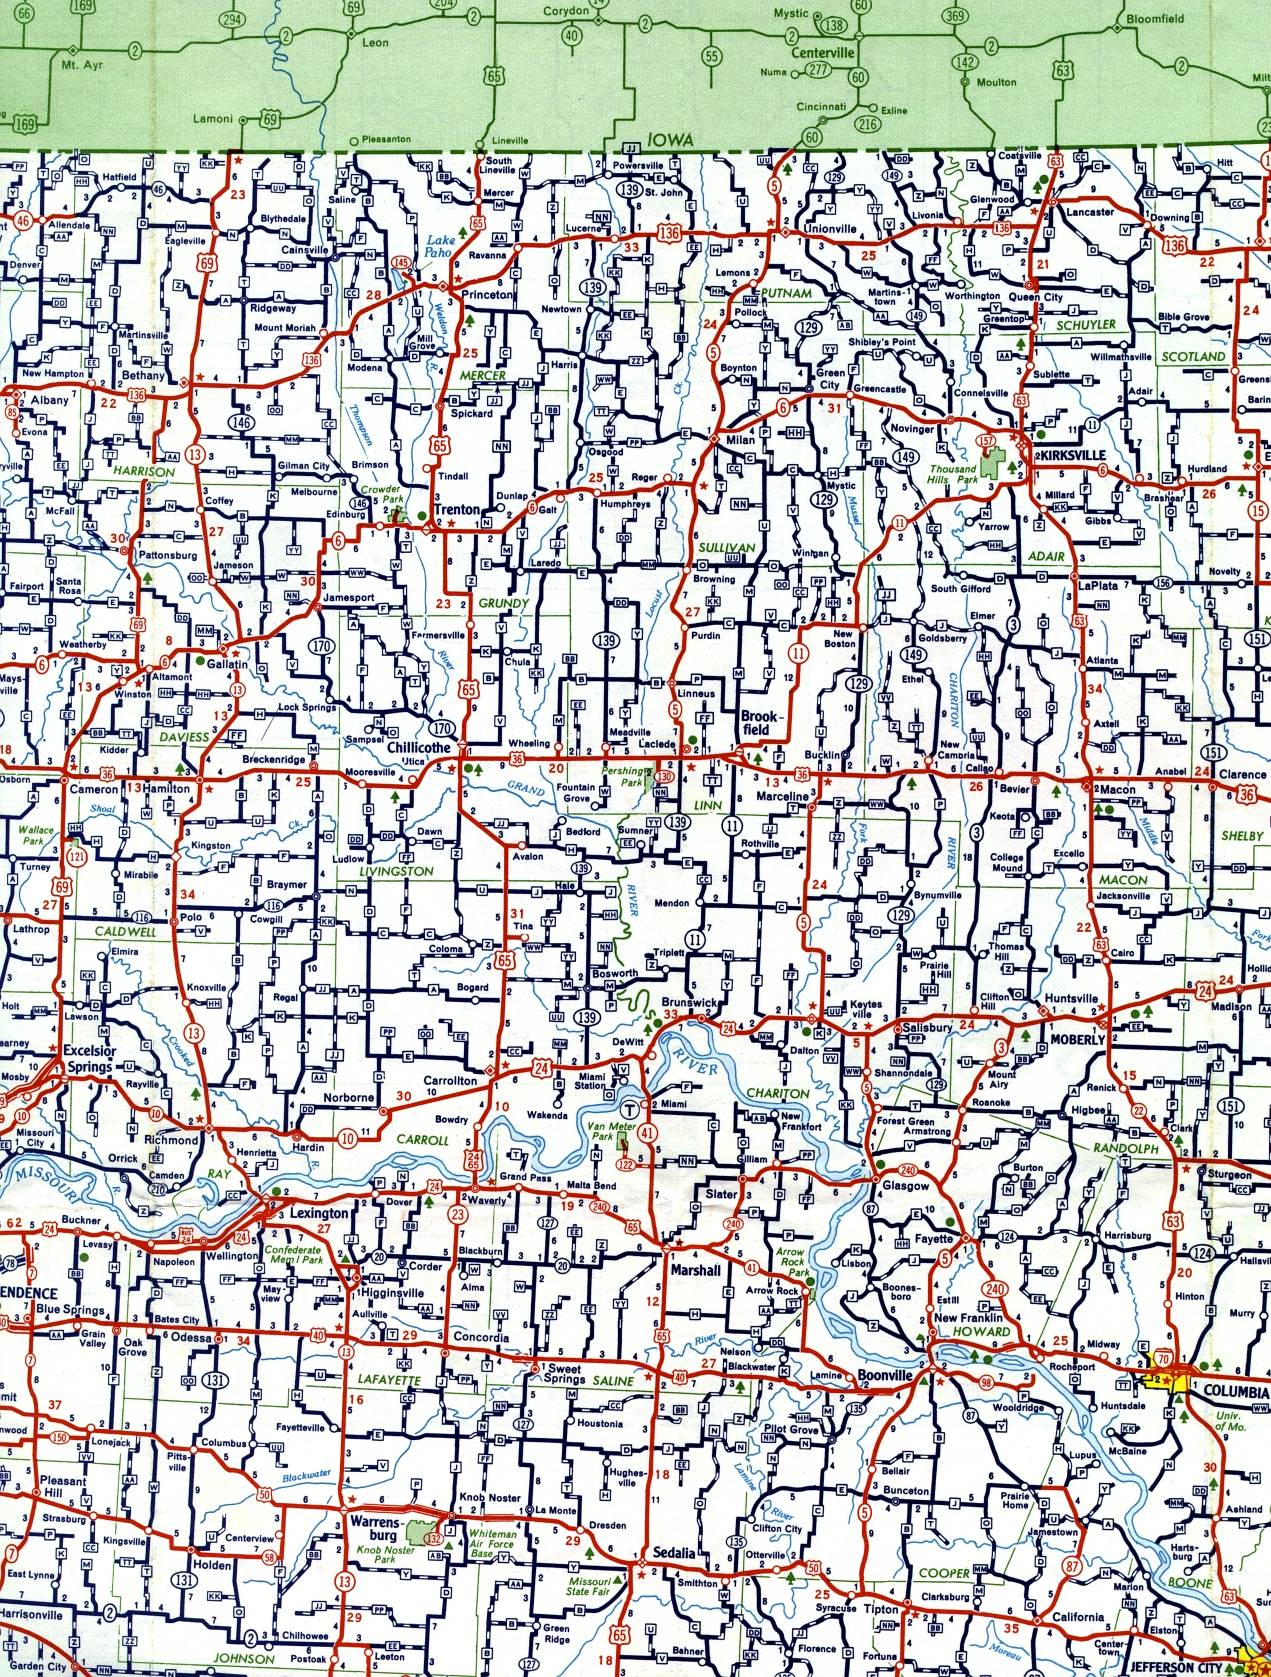 North-central section of Missouri from 1959 official highway map